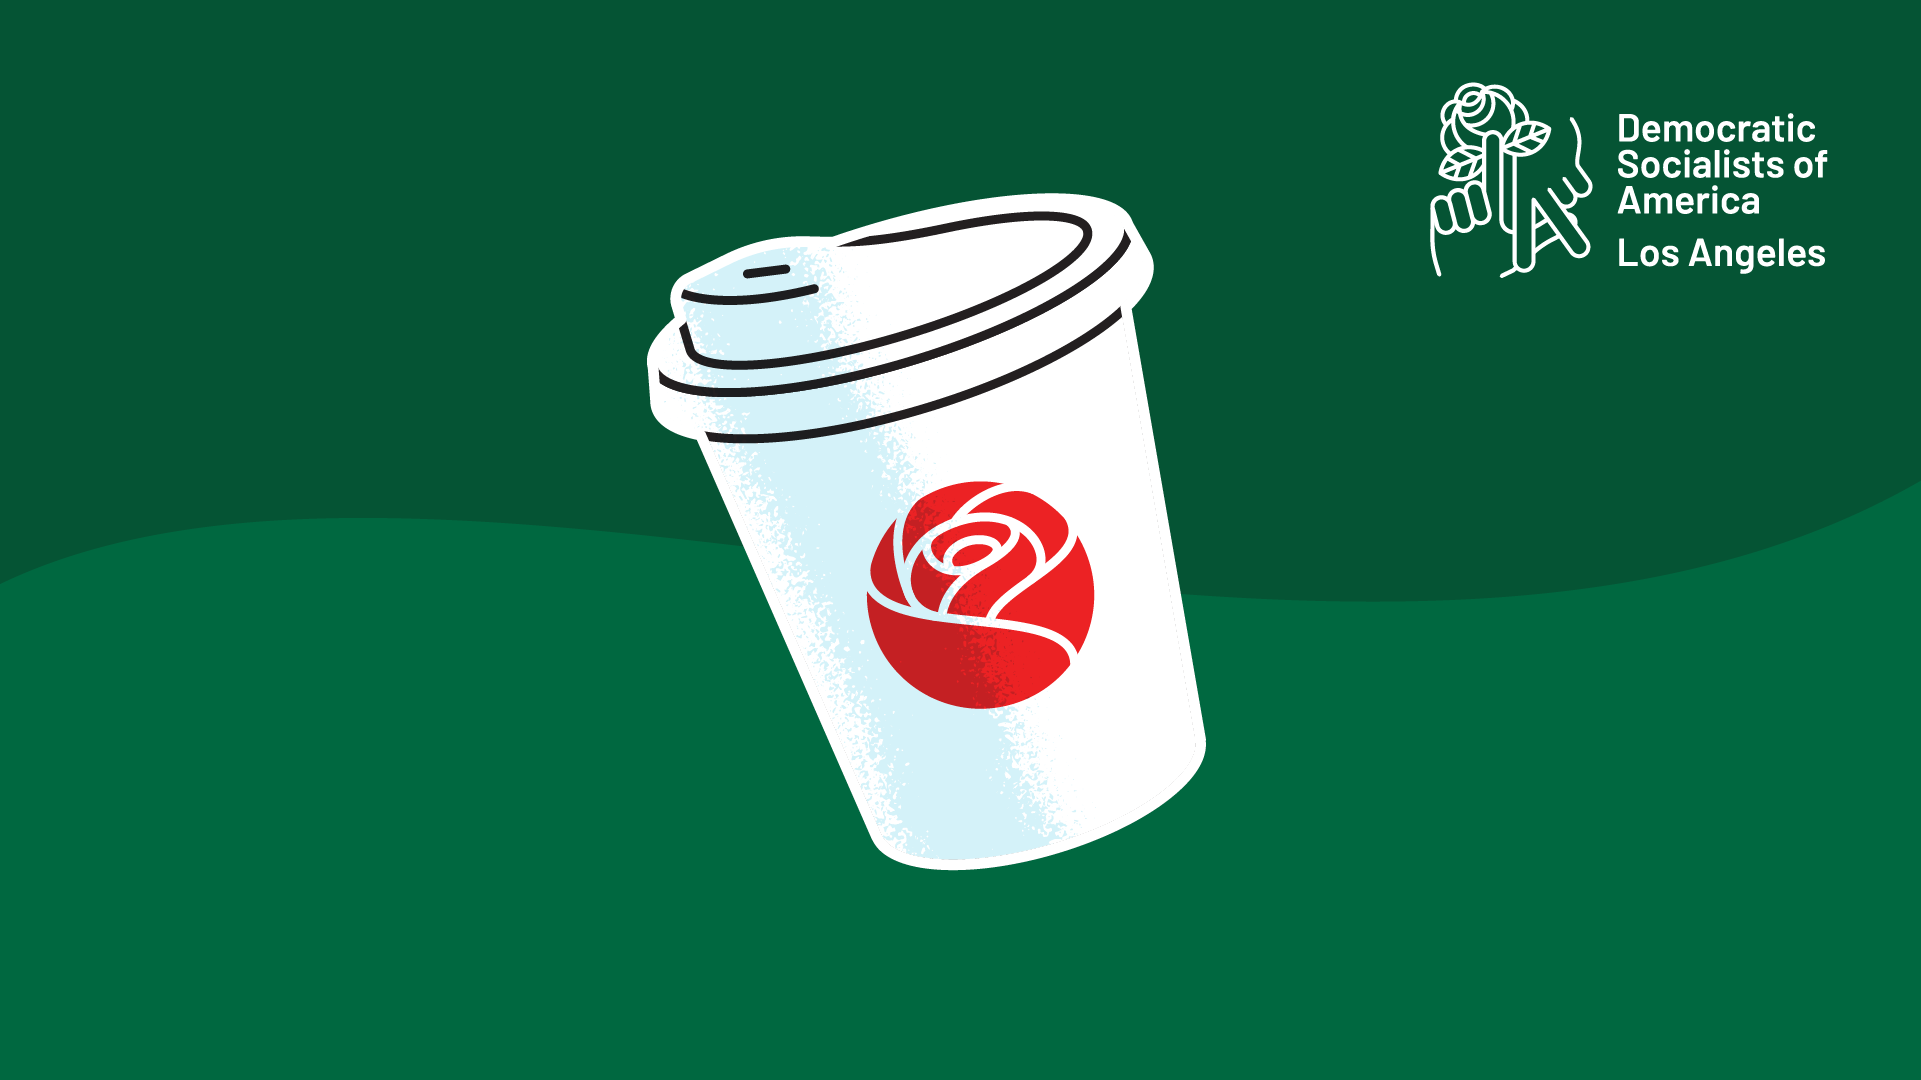 DSA-LA Starbucks Solidarity Meeting artwork that features a coffee cup with a rose in the center